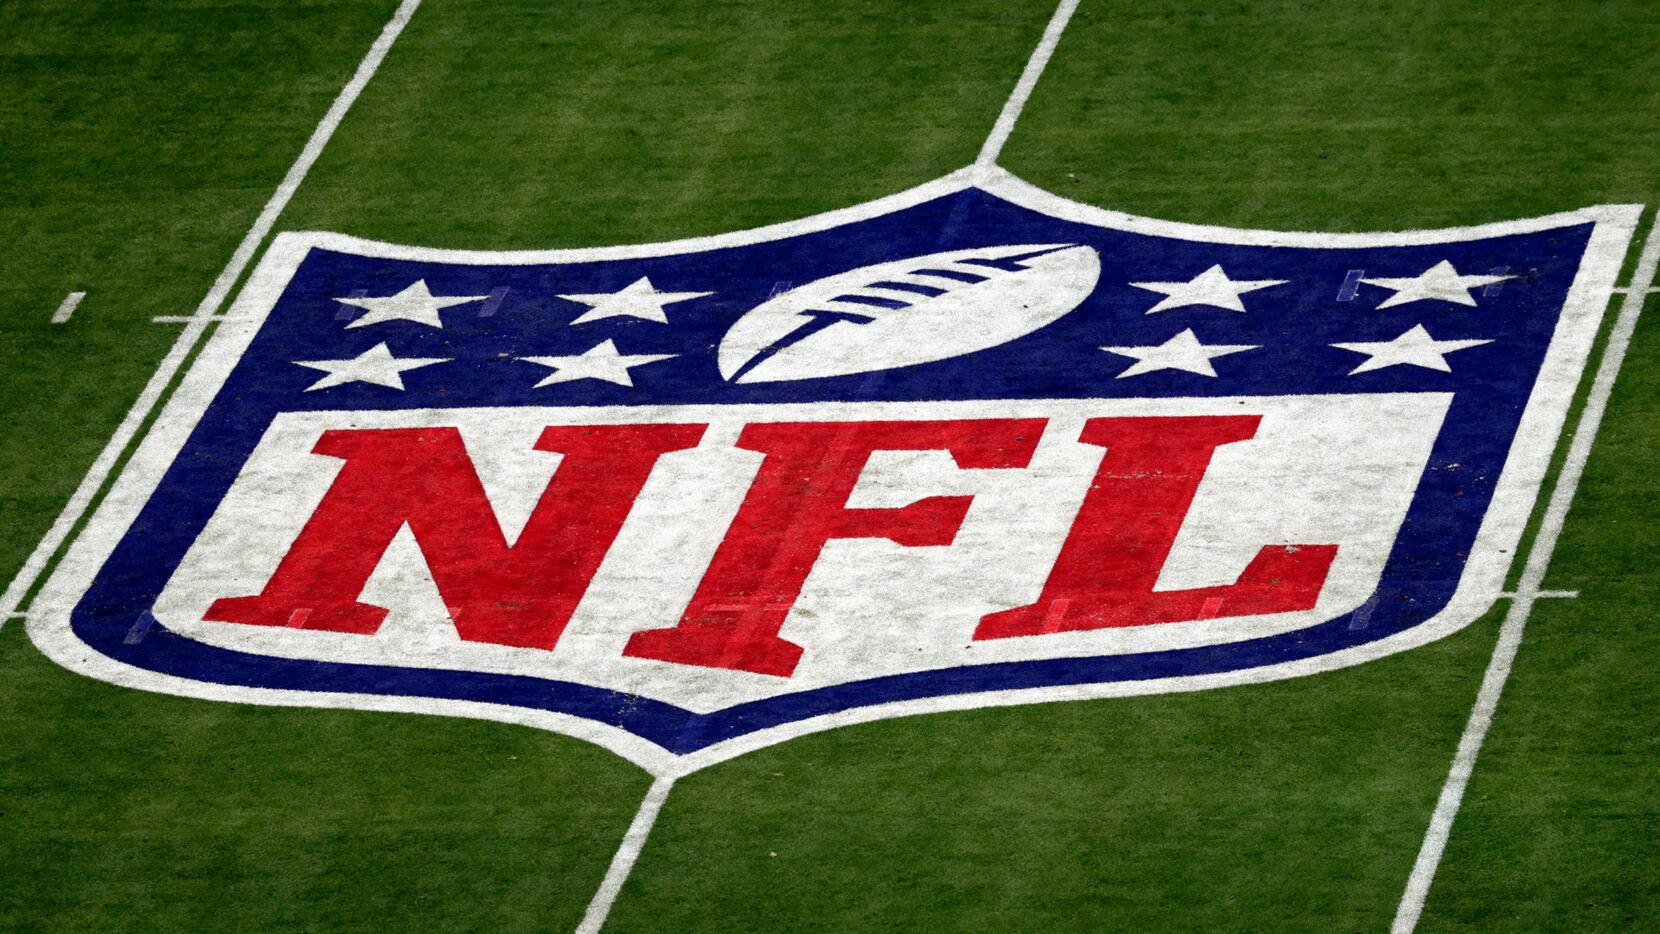 NFL Network and NFL RedZone will be offered direct to consumer on